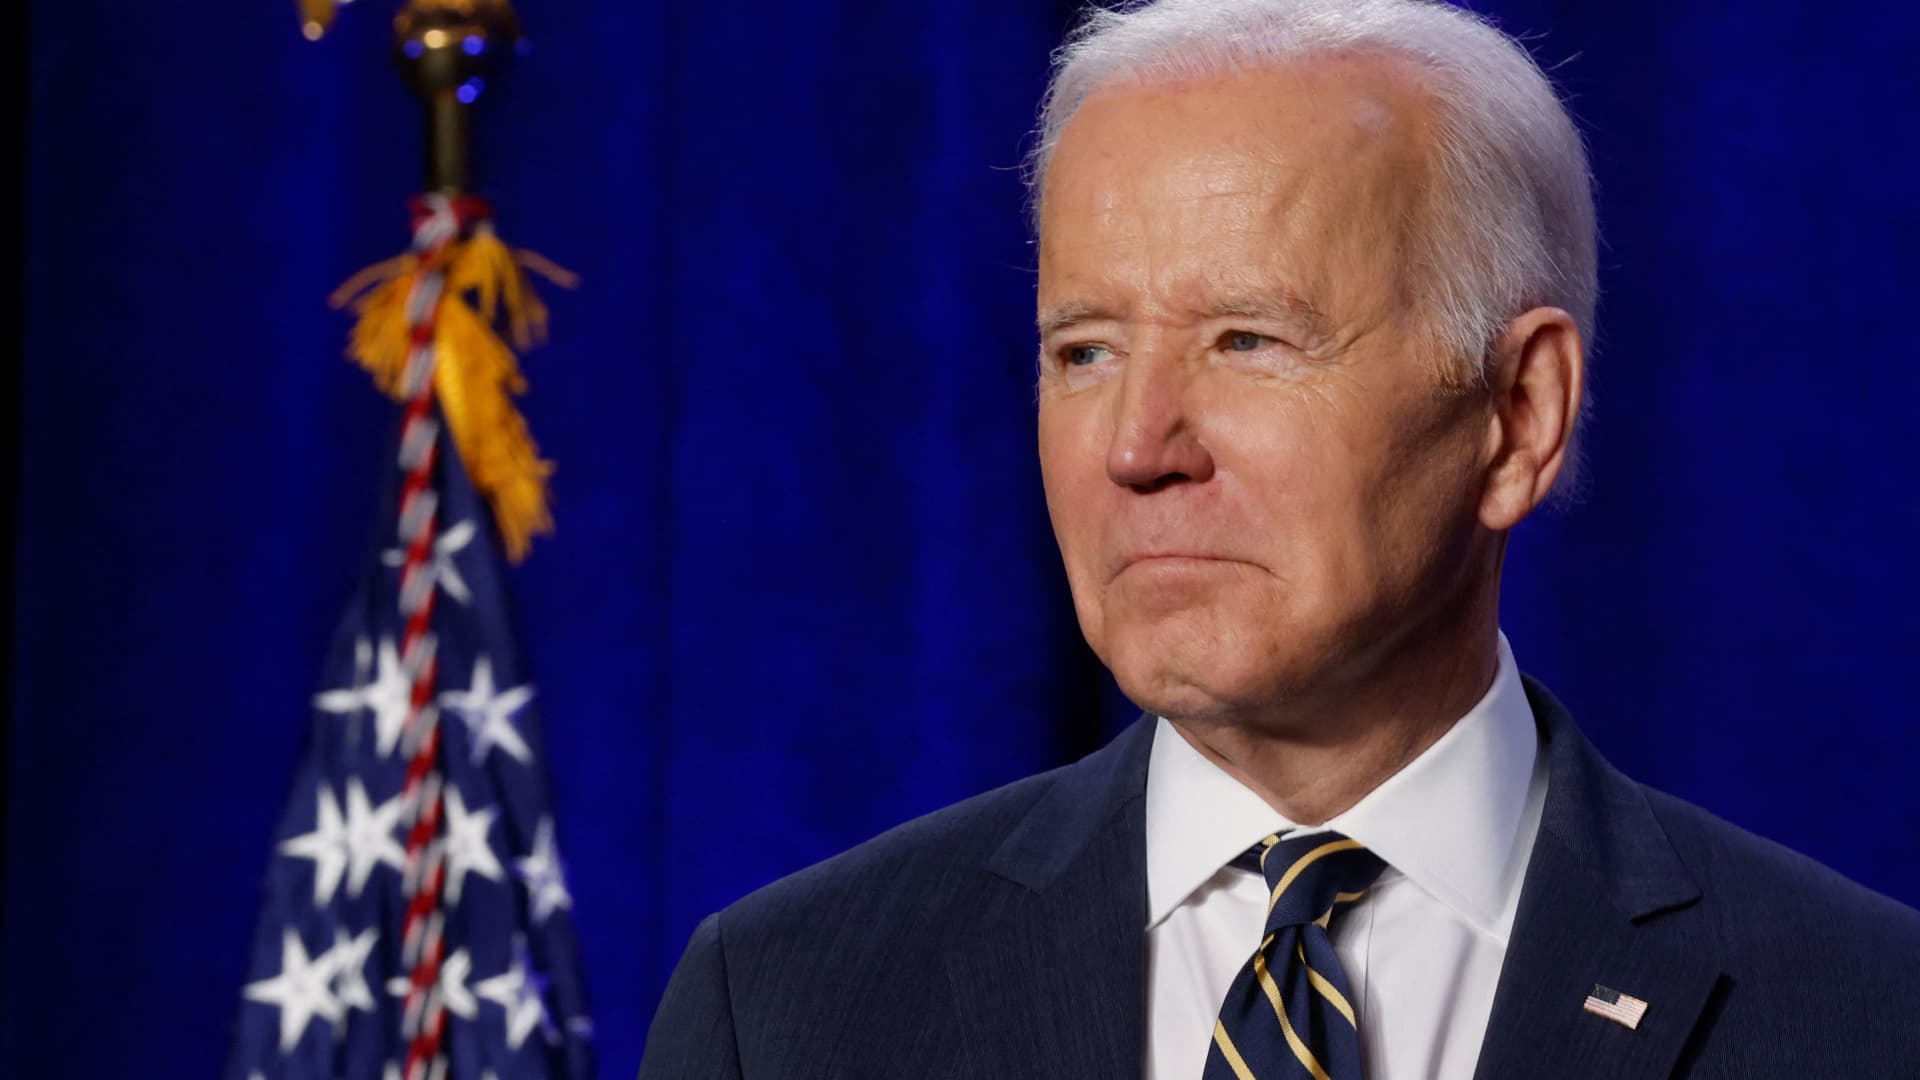 Biden’s job approval rating hits lowest point of his presidency as most Americans think the U.S. headed in the wrong direction